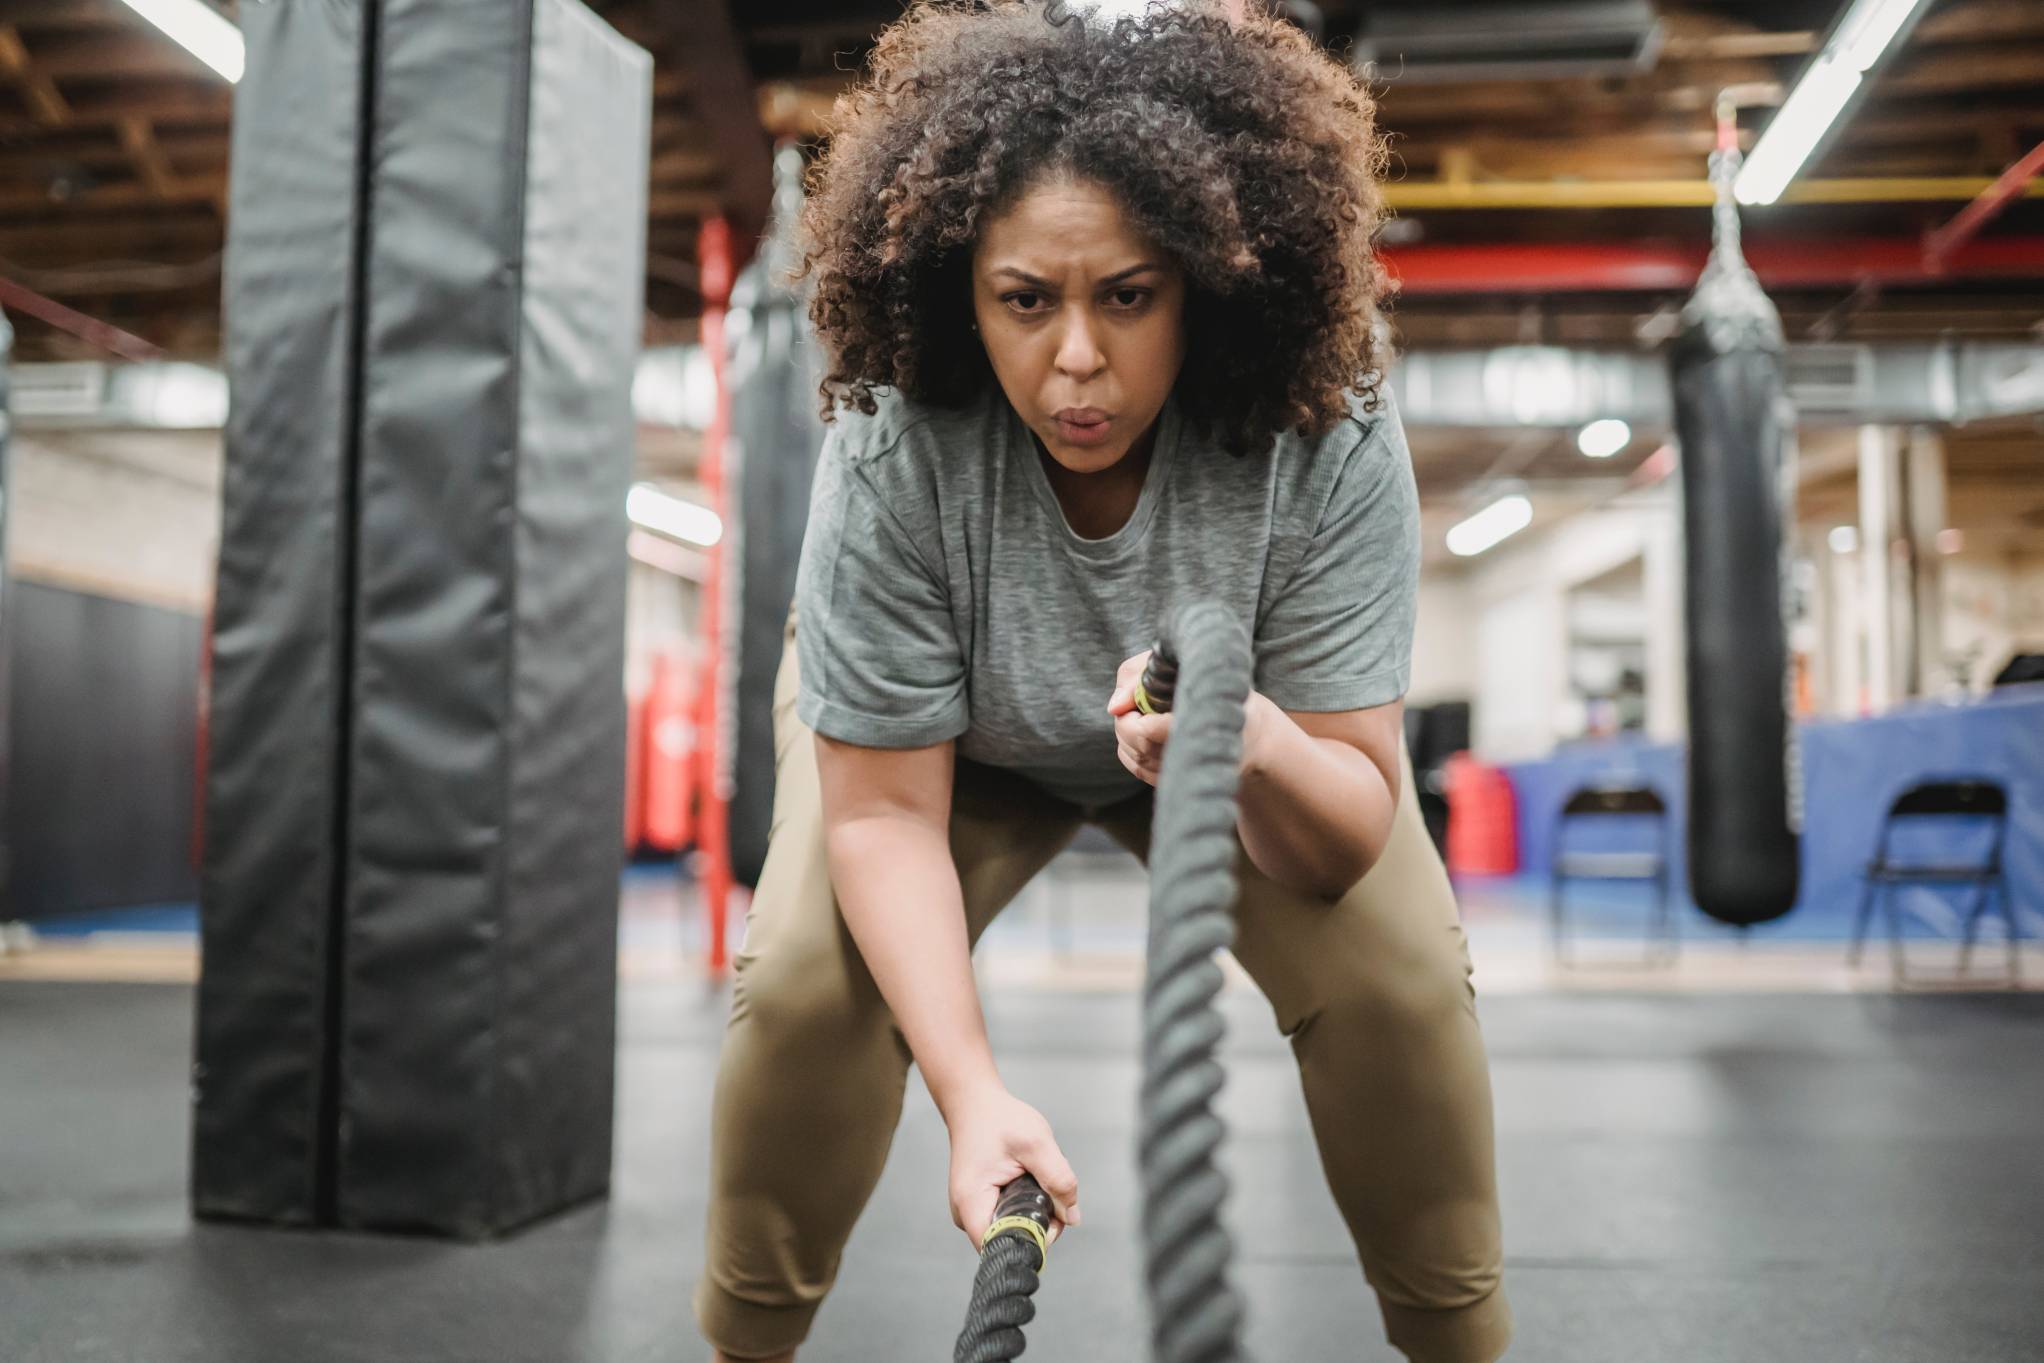 Woman training with ropes in a gym